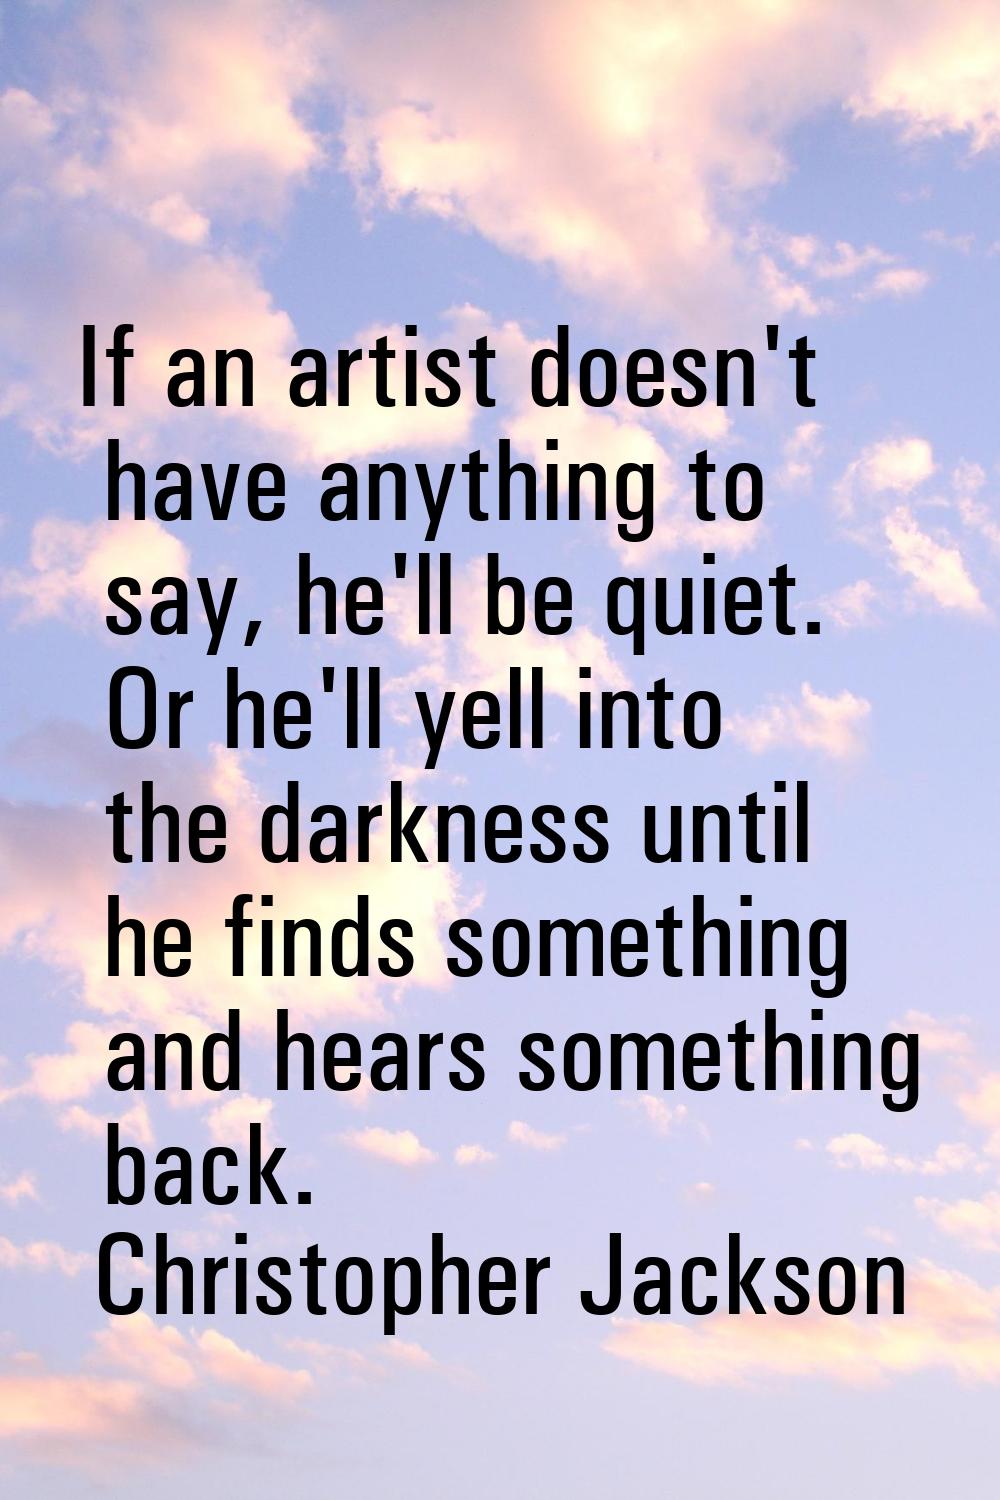 If an artist doesn't have anything to say, he'll be quiet. Or he'll yell into the darkness until he